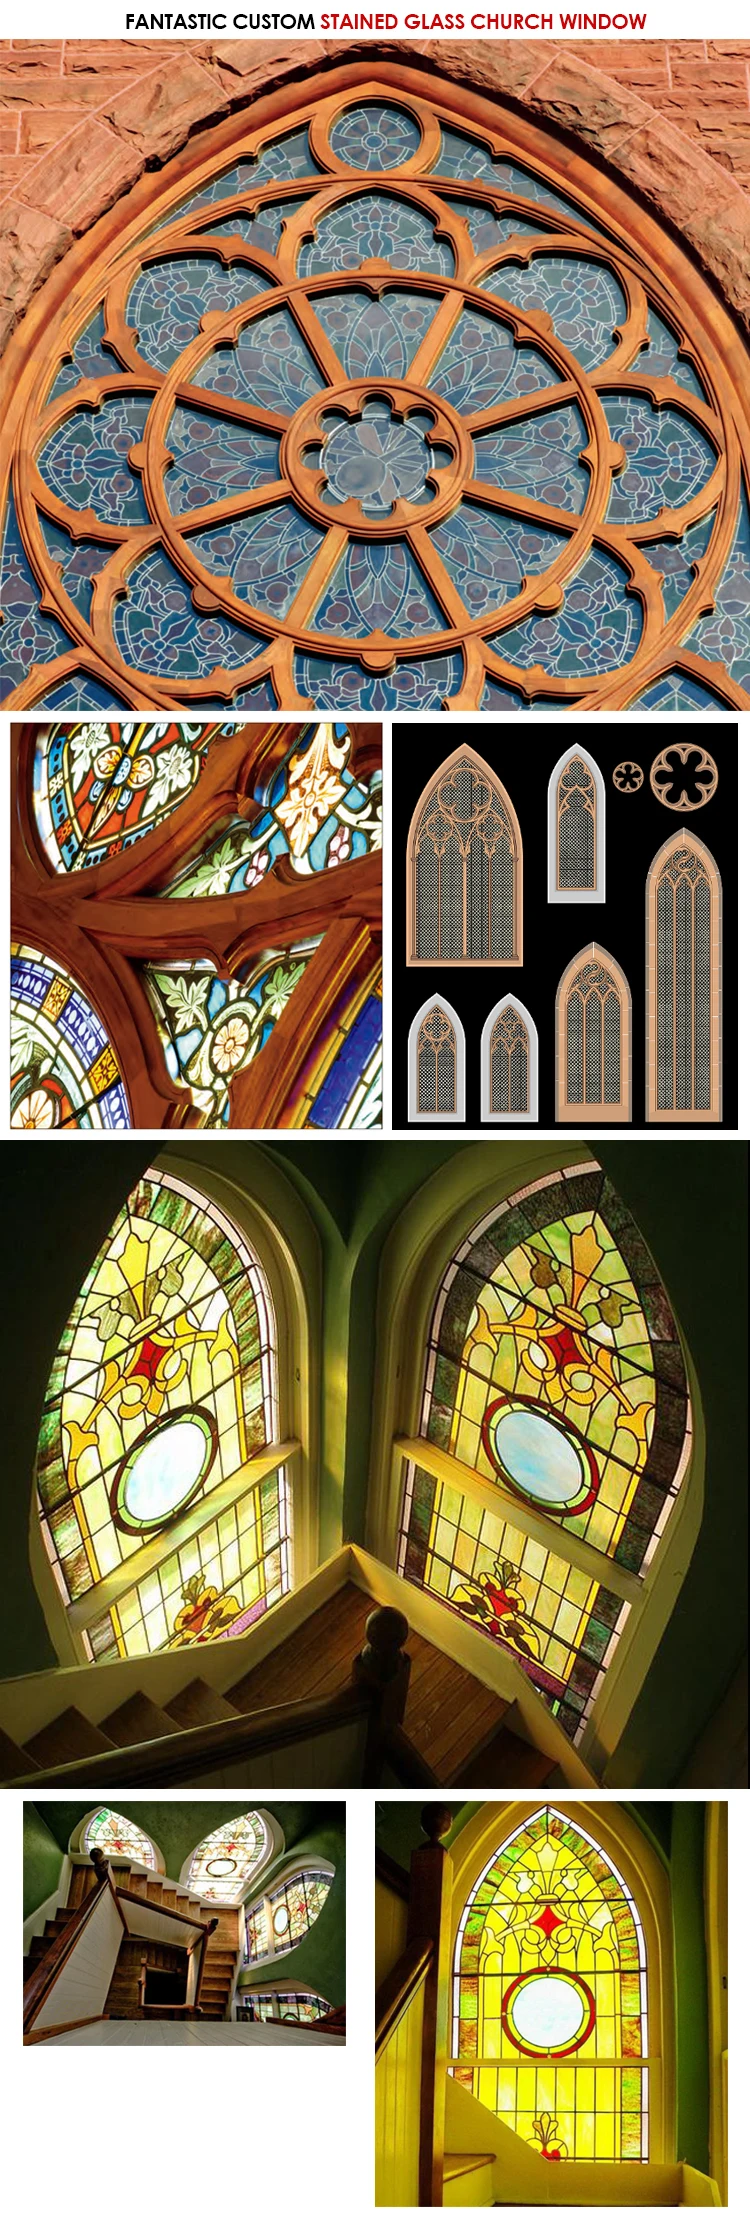 Hot Sale real stained glass windows arched top fixed transom with grille design